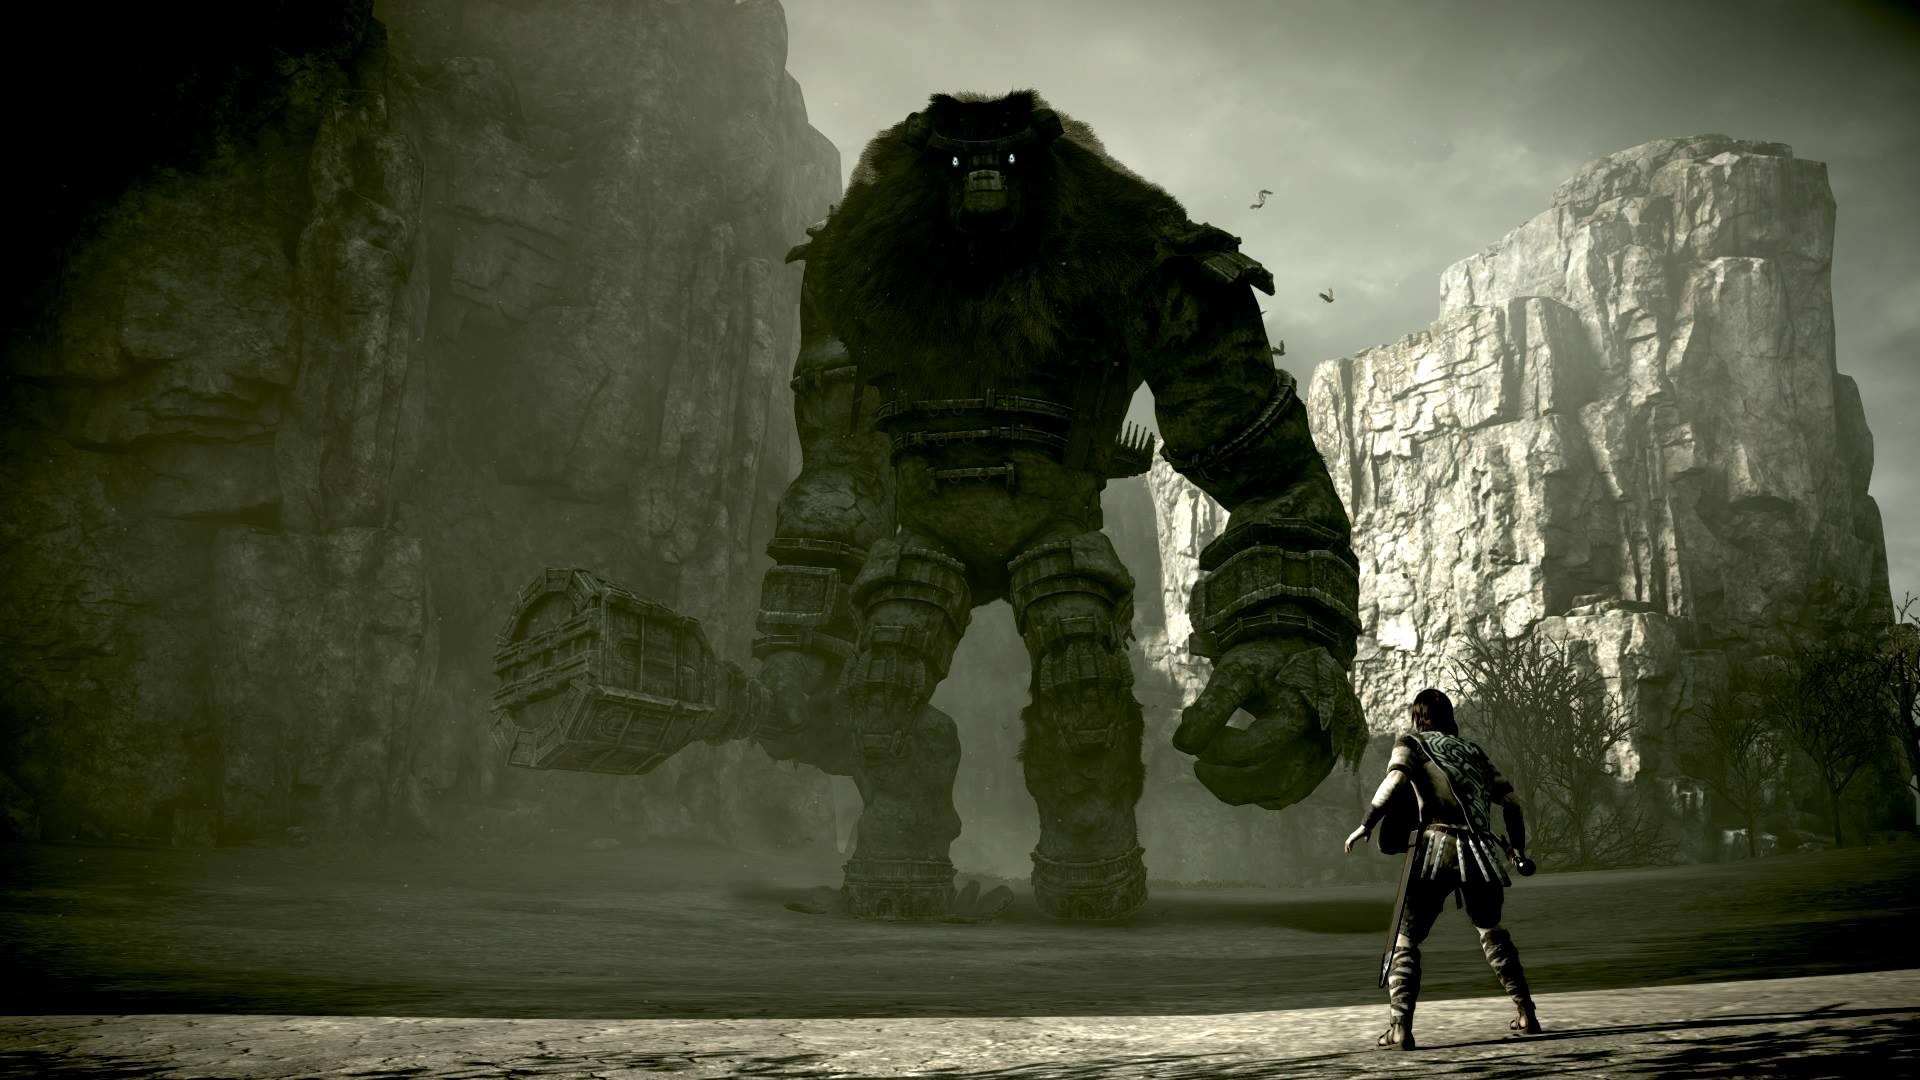 ArtStation - Shadow of the Colossus PS4 - Screenshots - first time playing, shadow  colossus ps4 